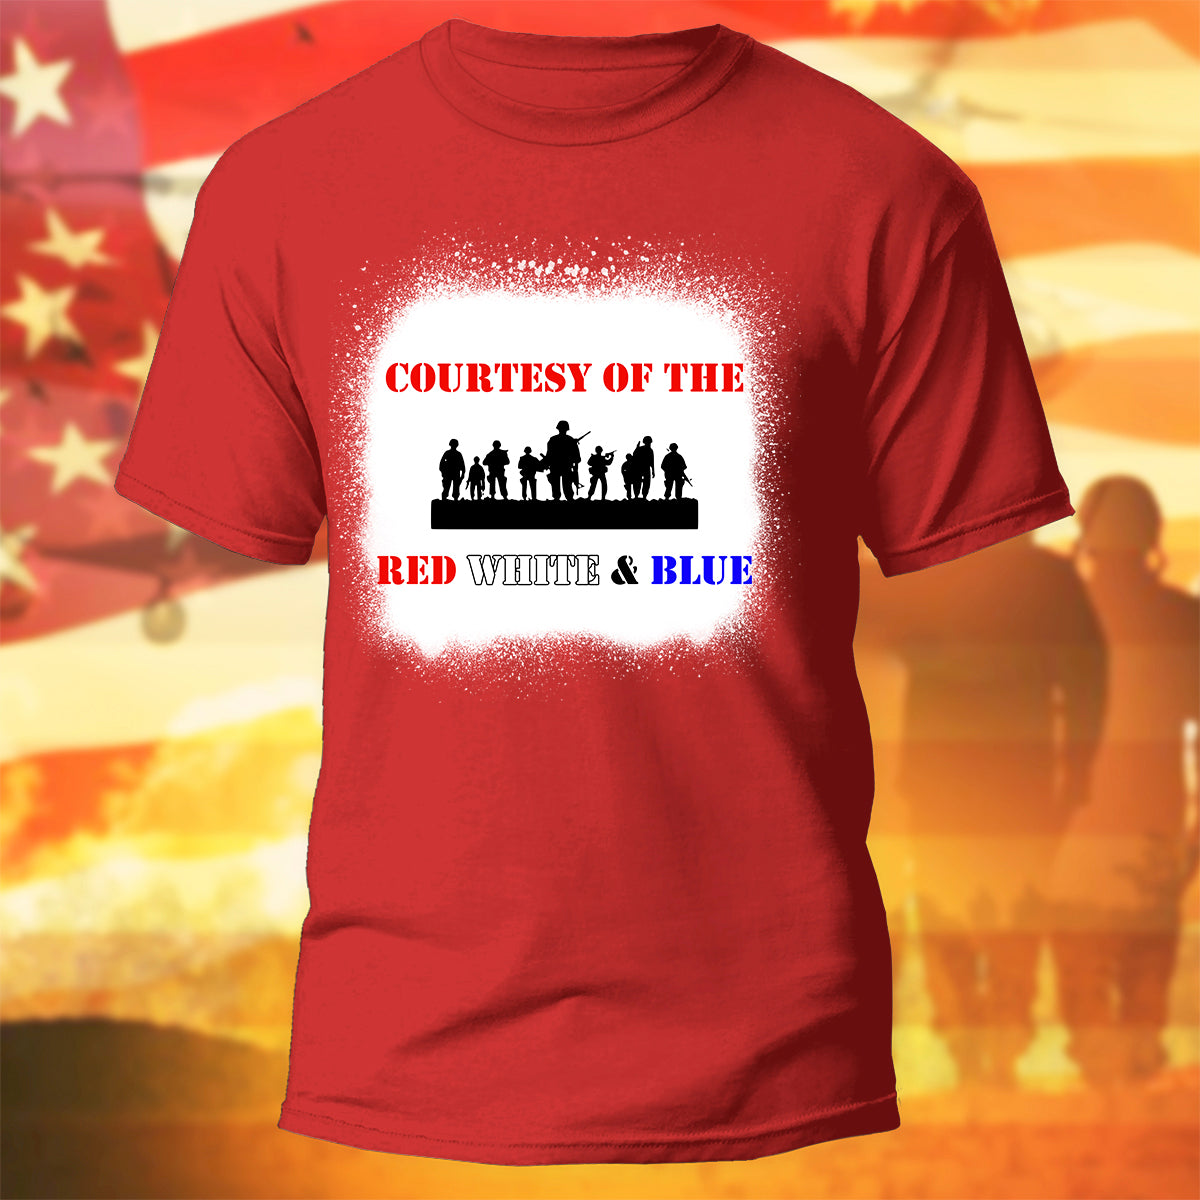 USA Patriotic T-Shirt Courtesy Of The Red White And Blue Shirt Patriot Gift